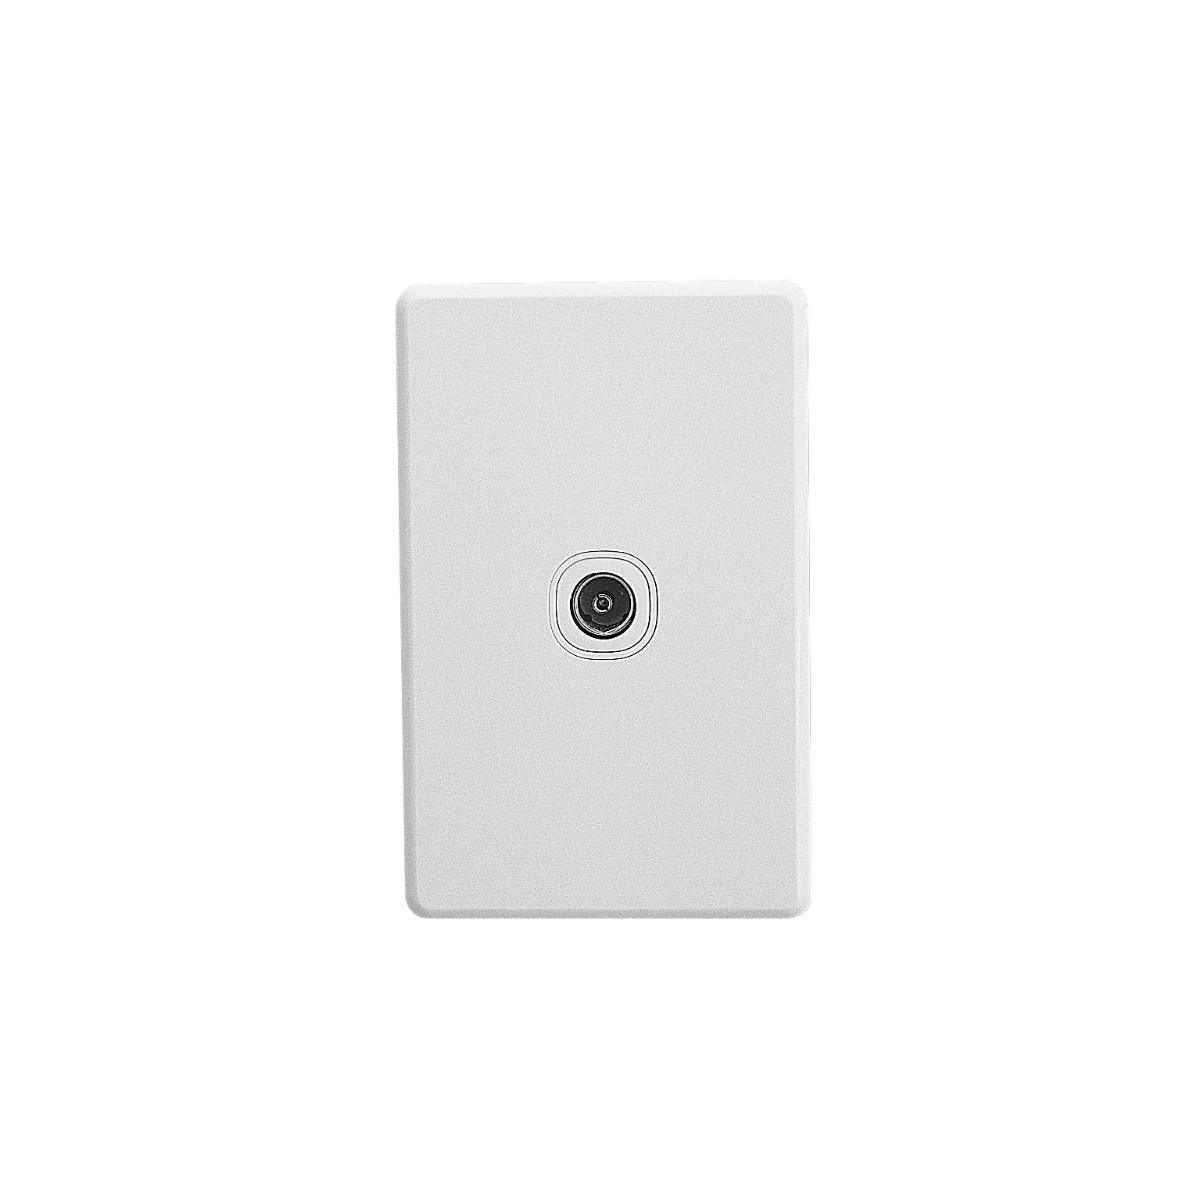 C2000 TV OUTLET 75OHM 1G PAL WHITE